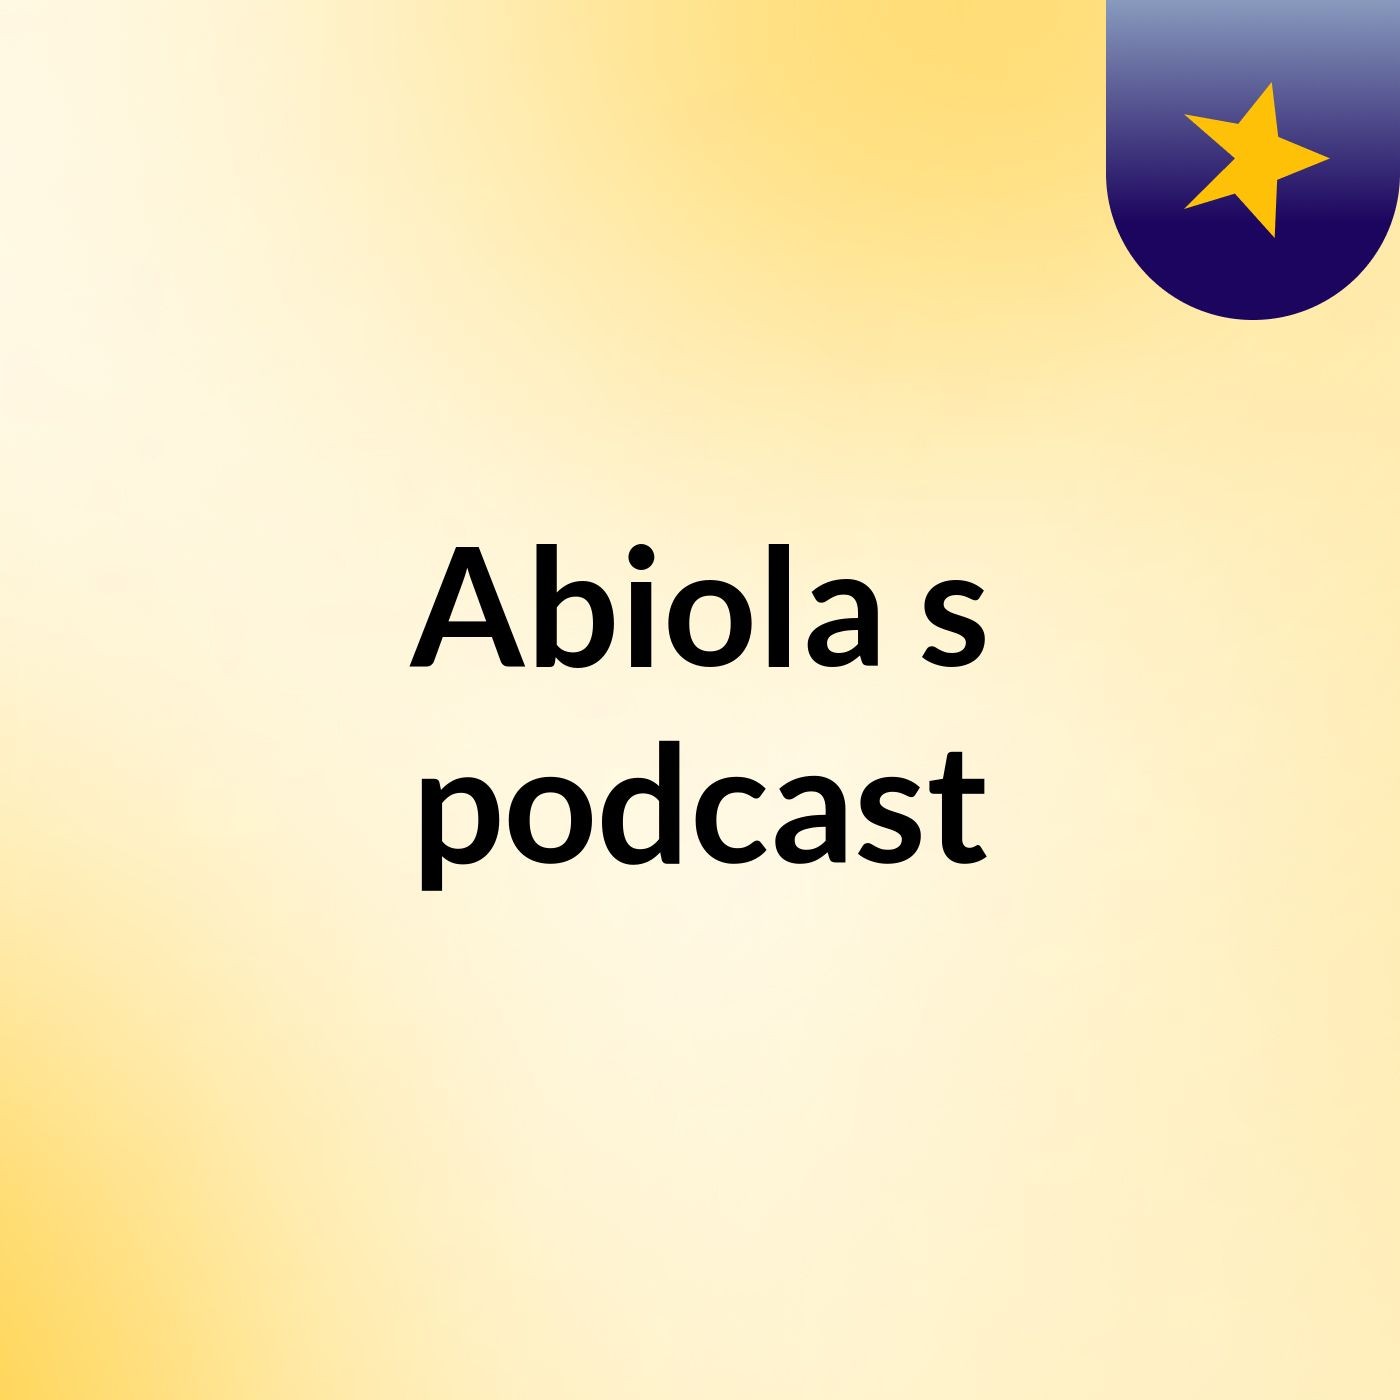 Abiola's podcast